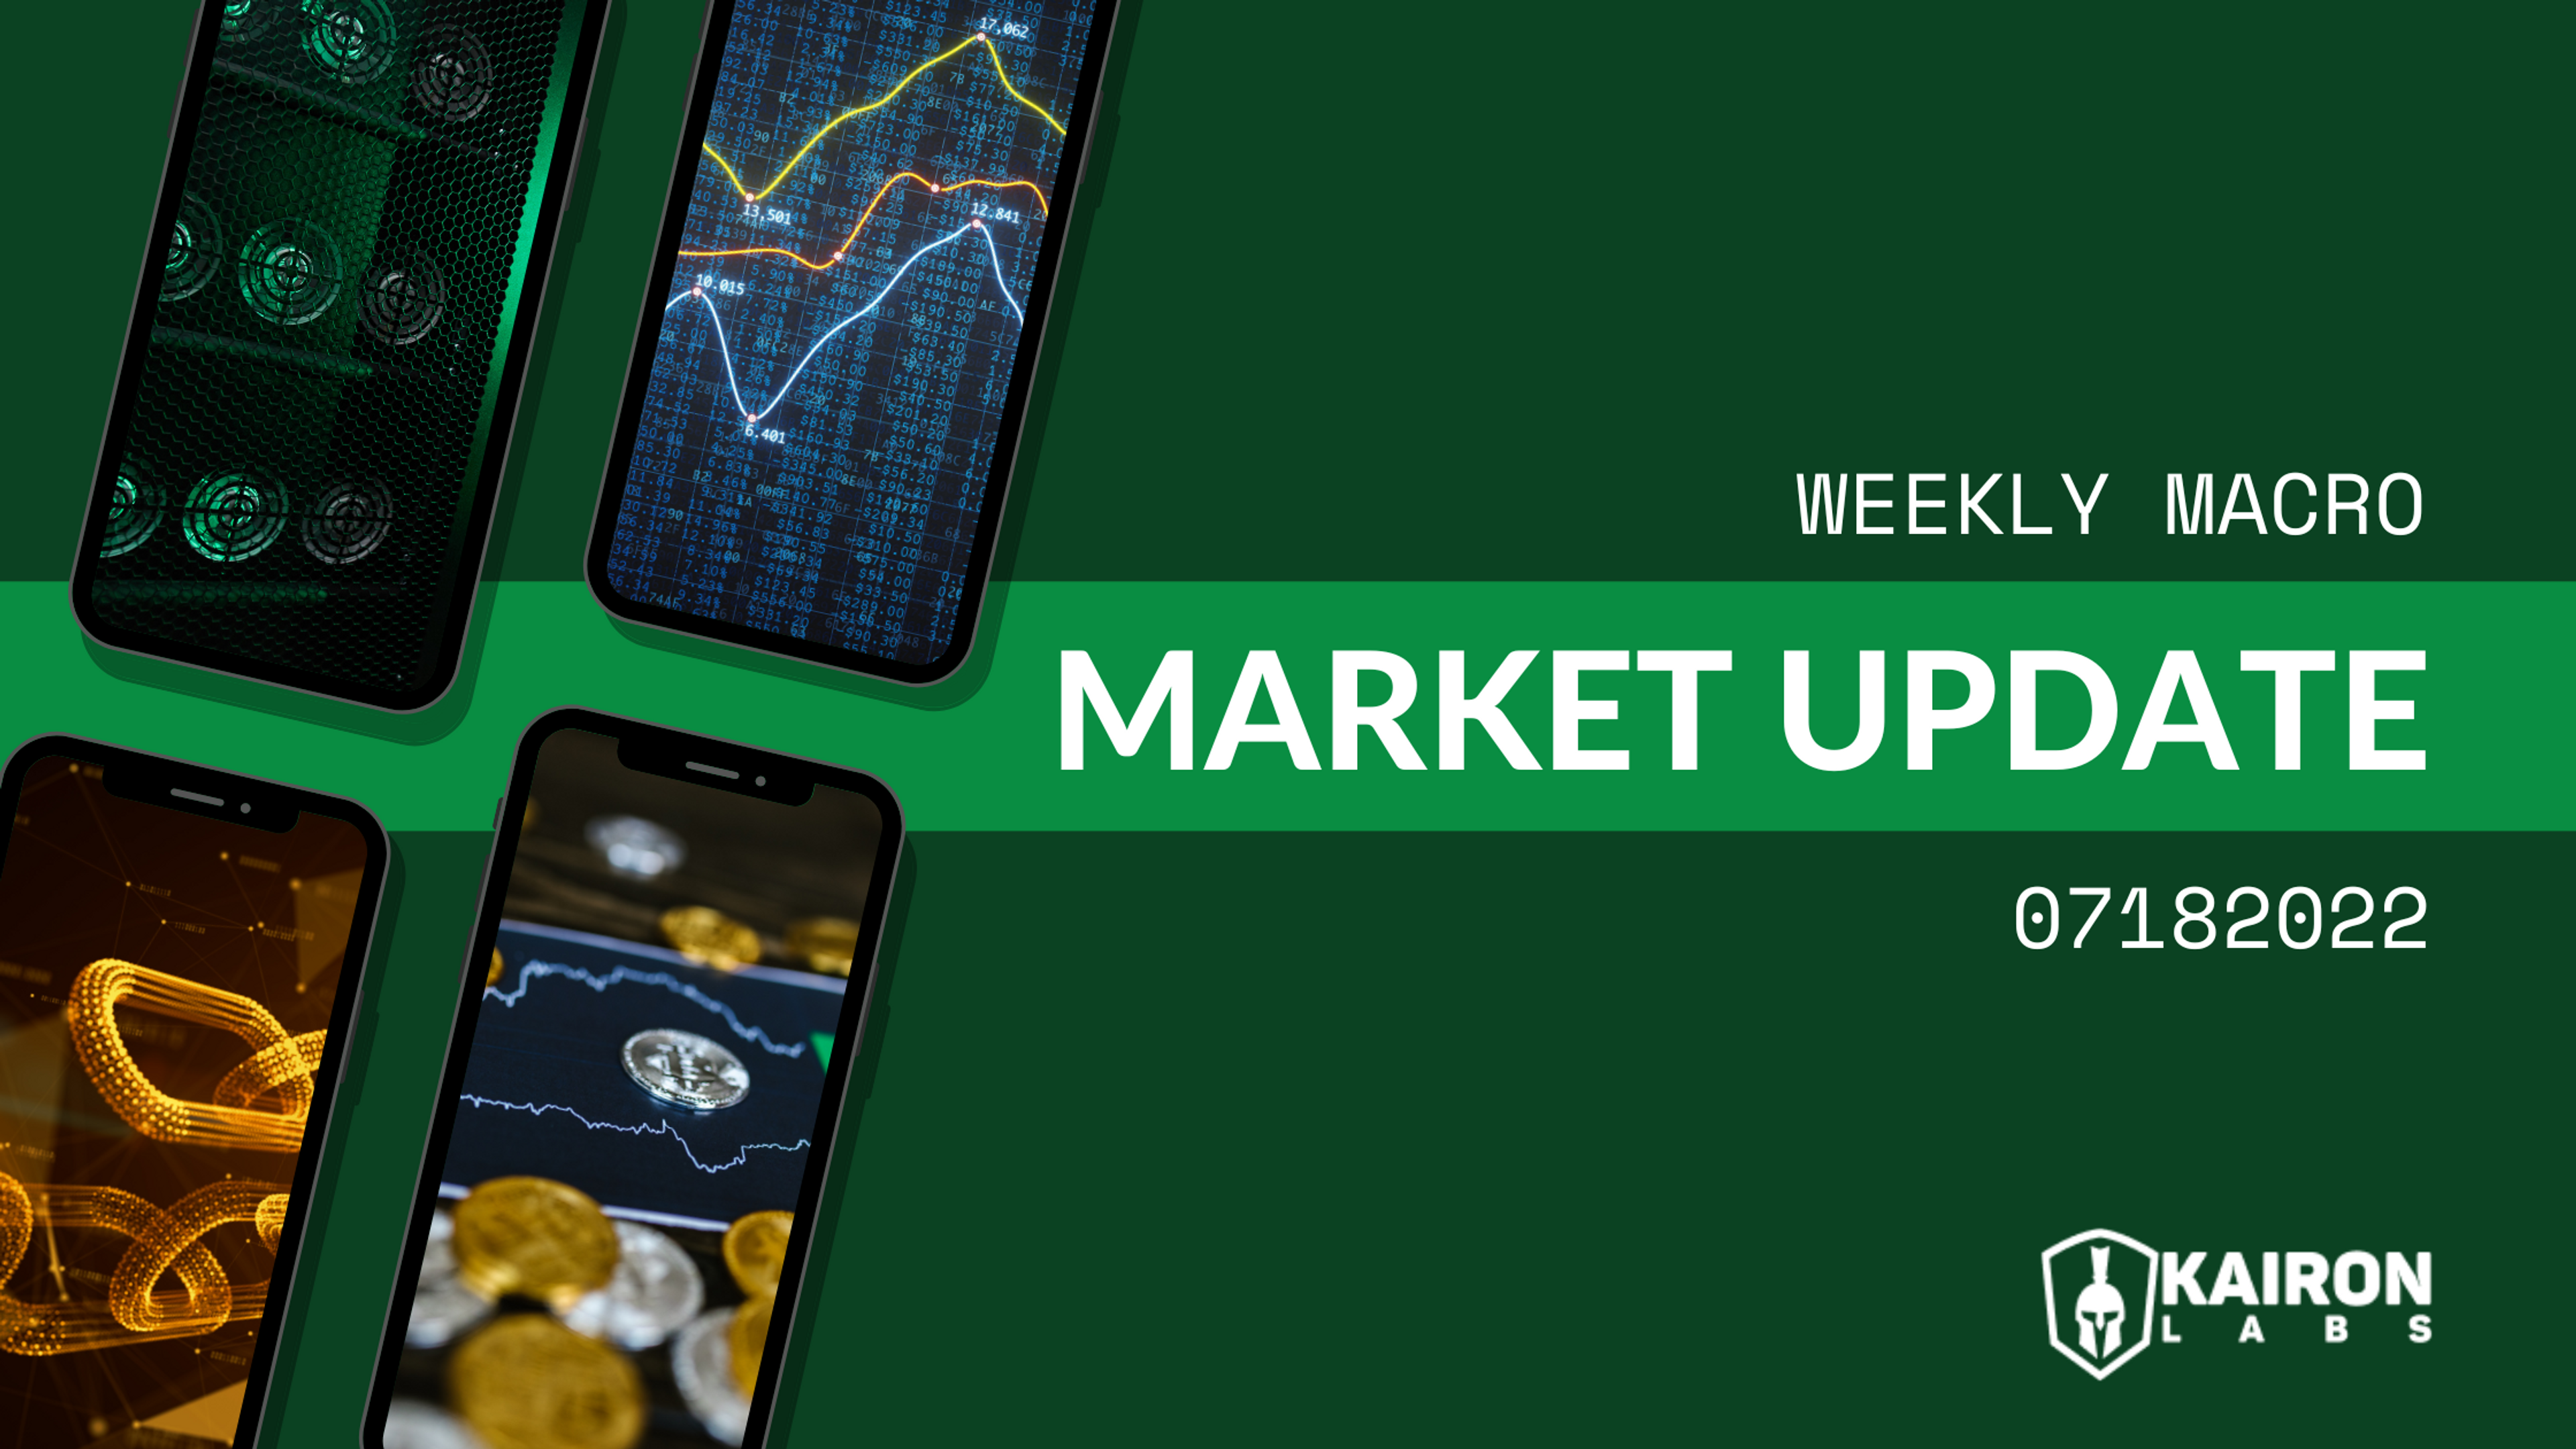 Weekly-update_18_07_blog-banner_green.png